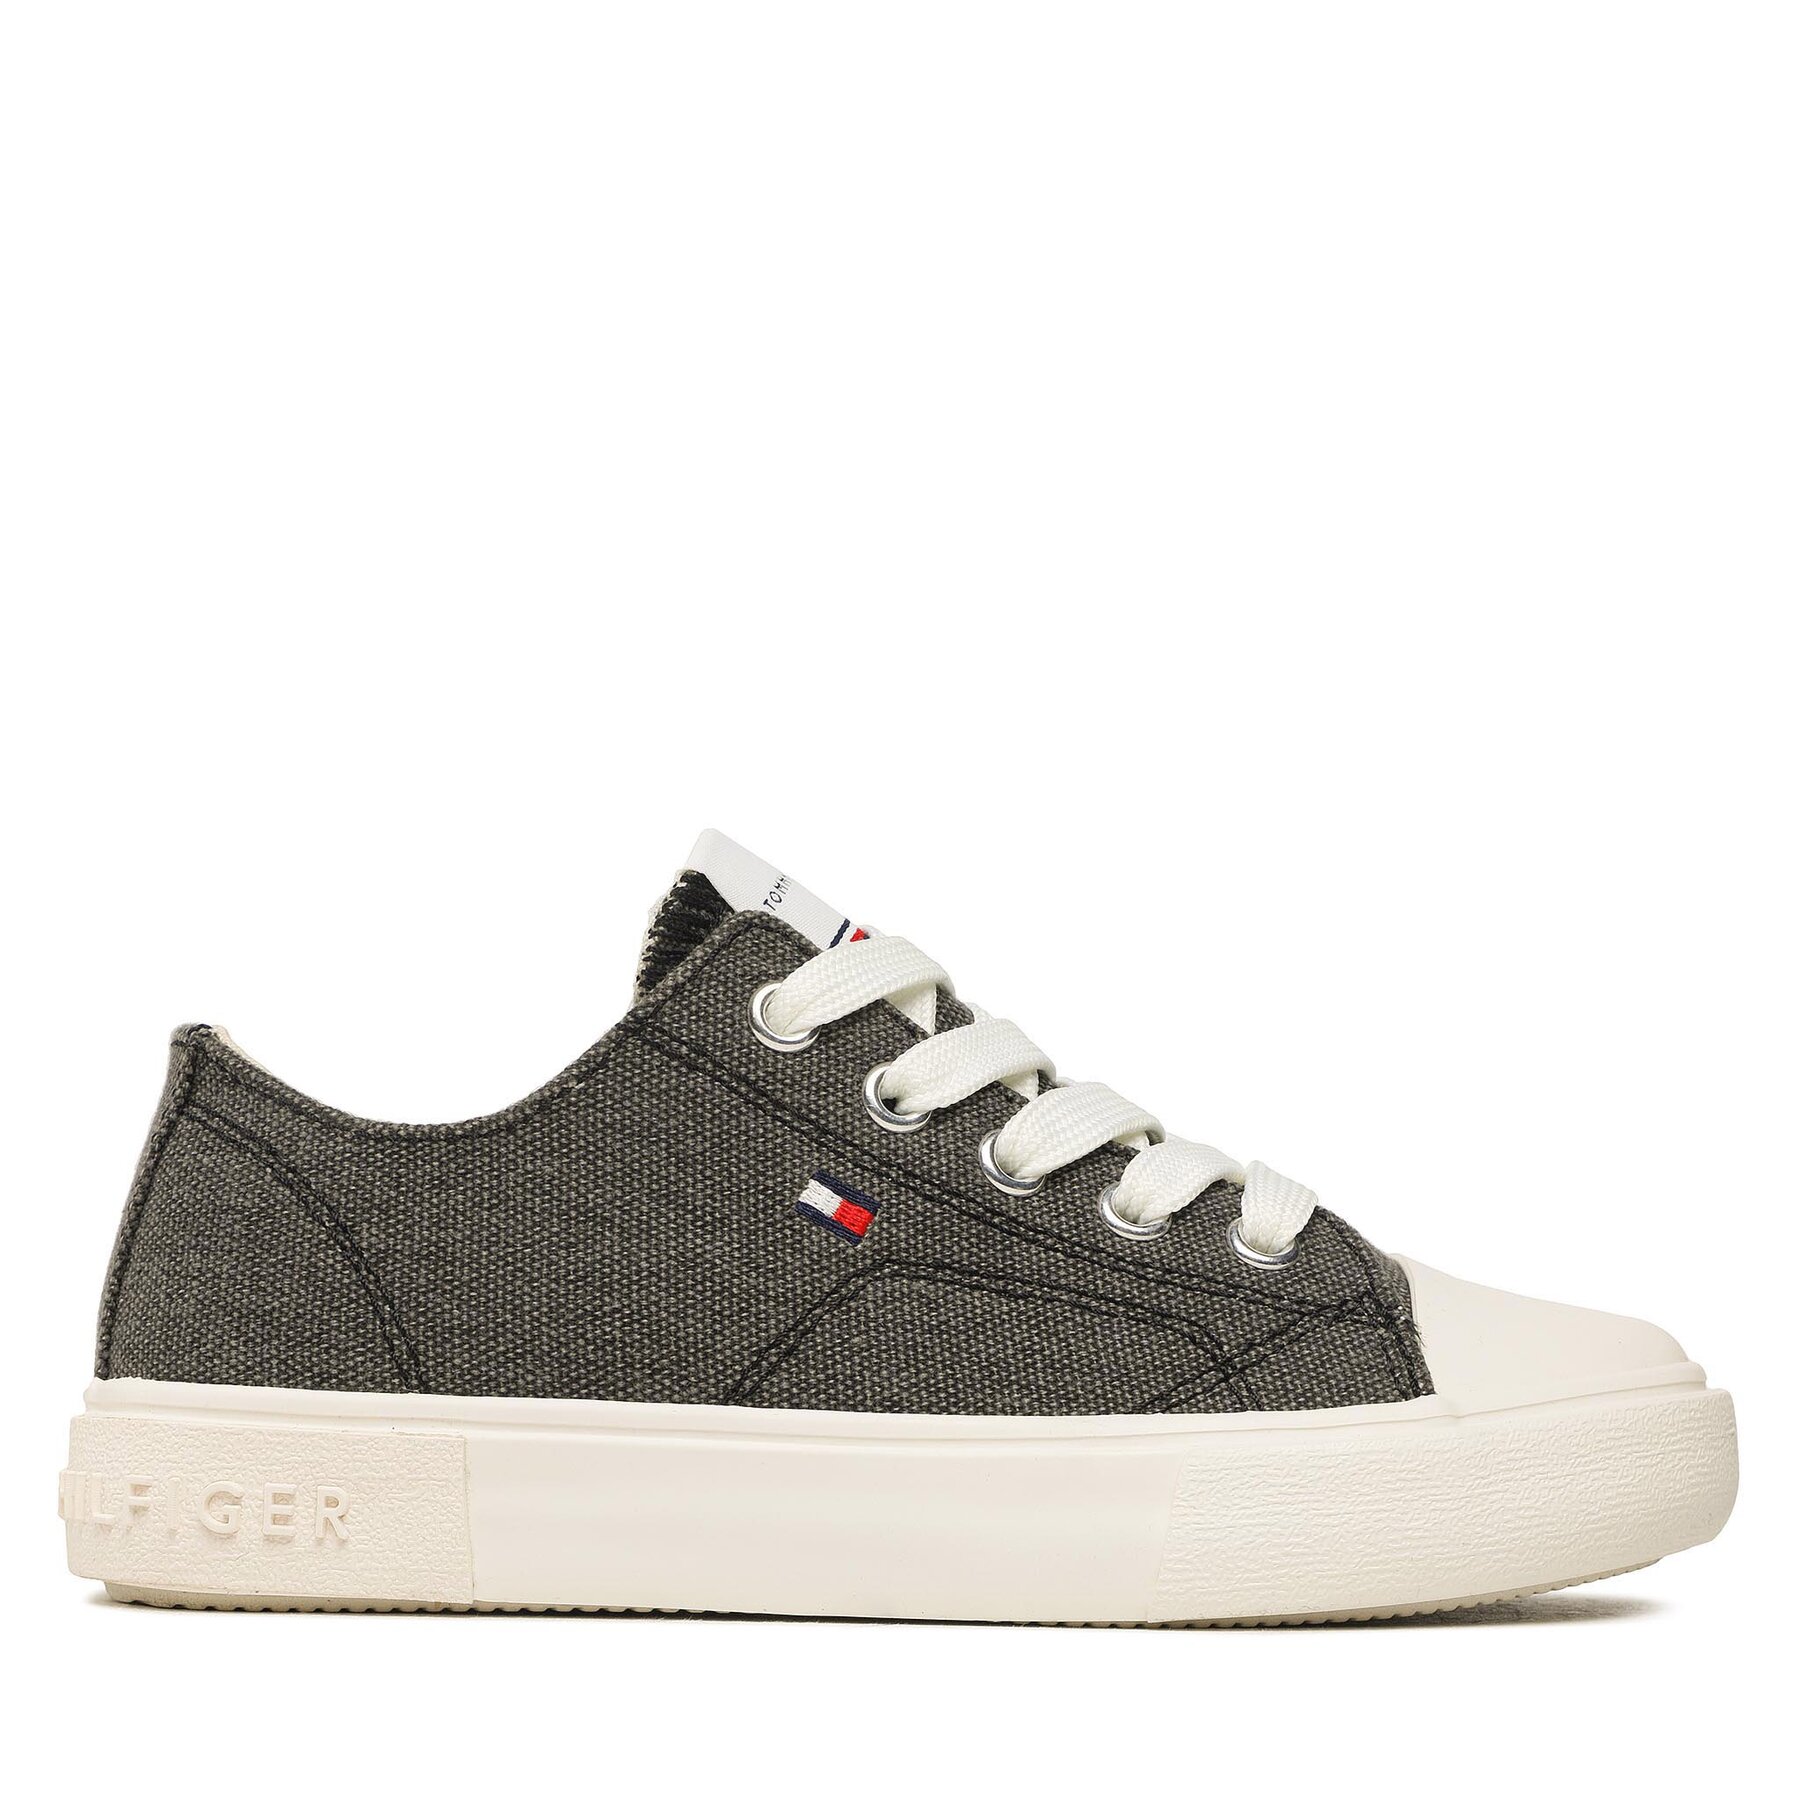 Sneakers aus Stoff Tommy Hilfiger Low Cut Lace-Up Sneaker T3X9-32827-0890 M Black 999 von Tommy Hilfiger